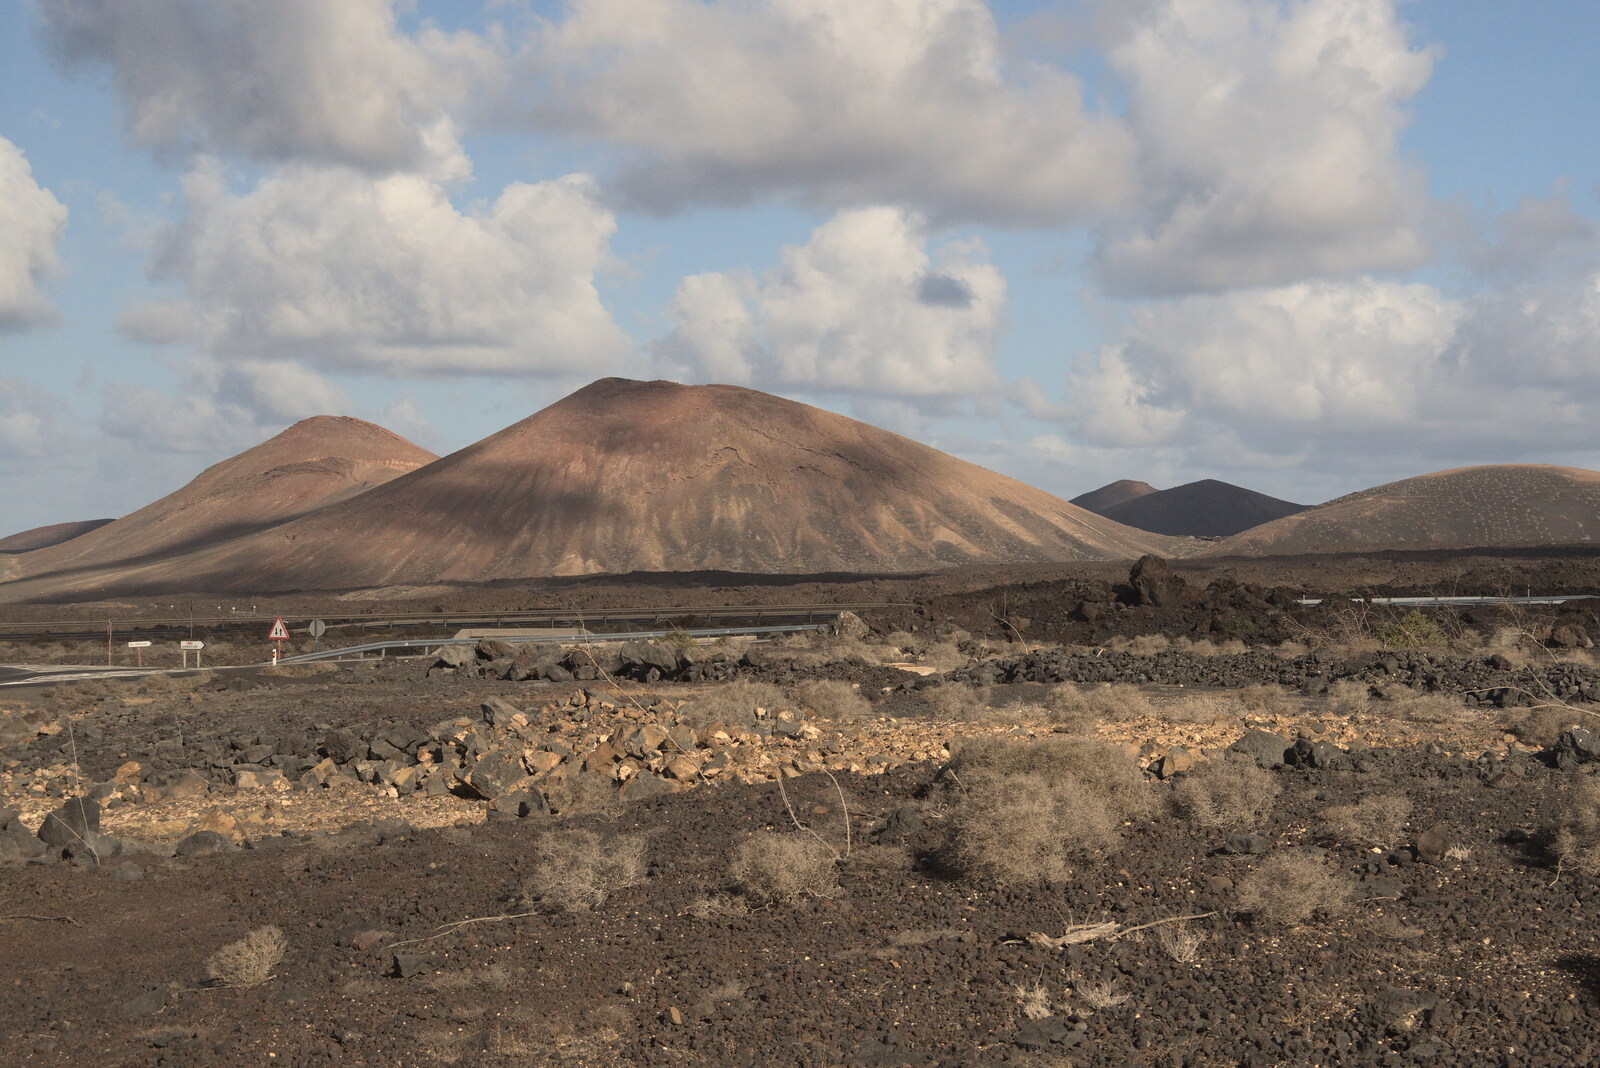 The volcanoes of Lanzarote from The Volcanoes of Lanzarote, Canary Islands, Spain - 27th October 2021